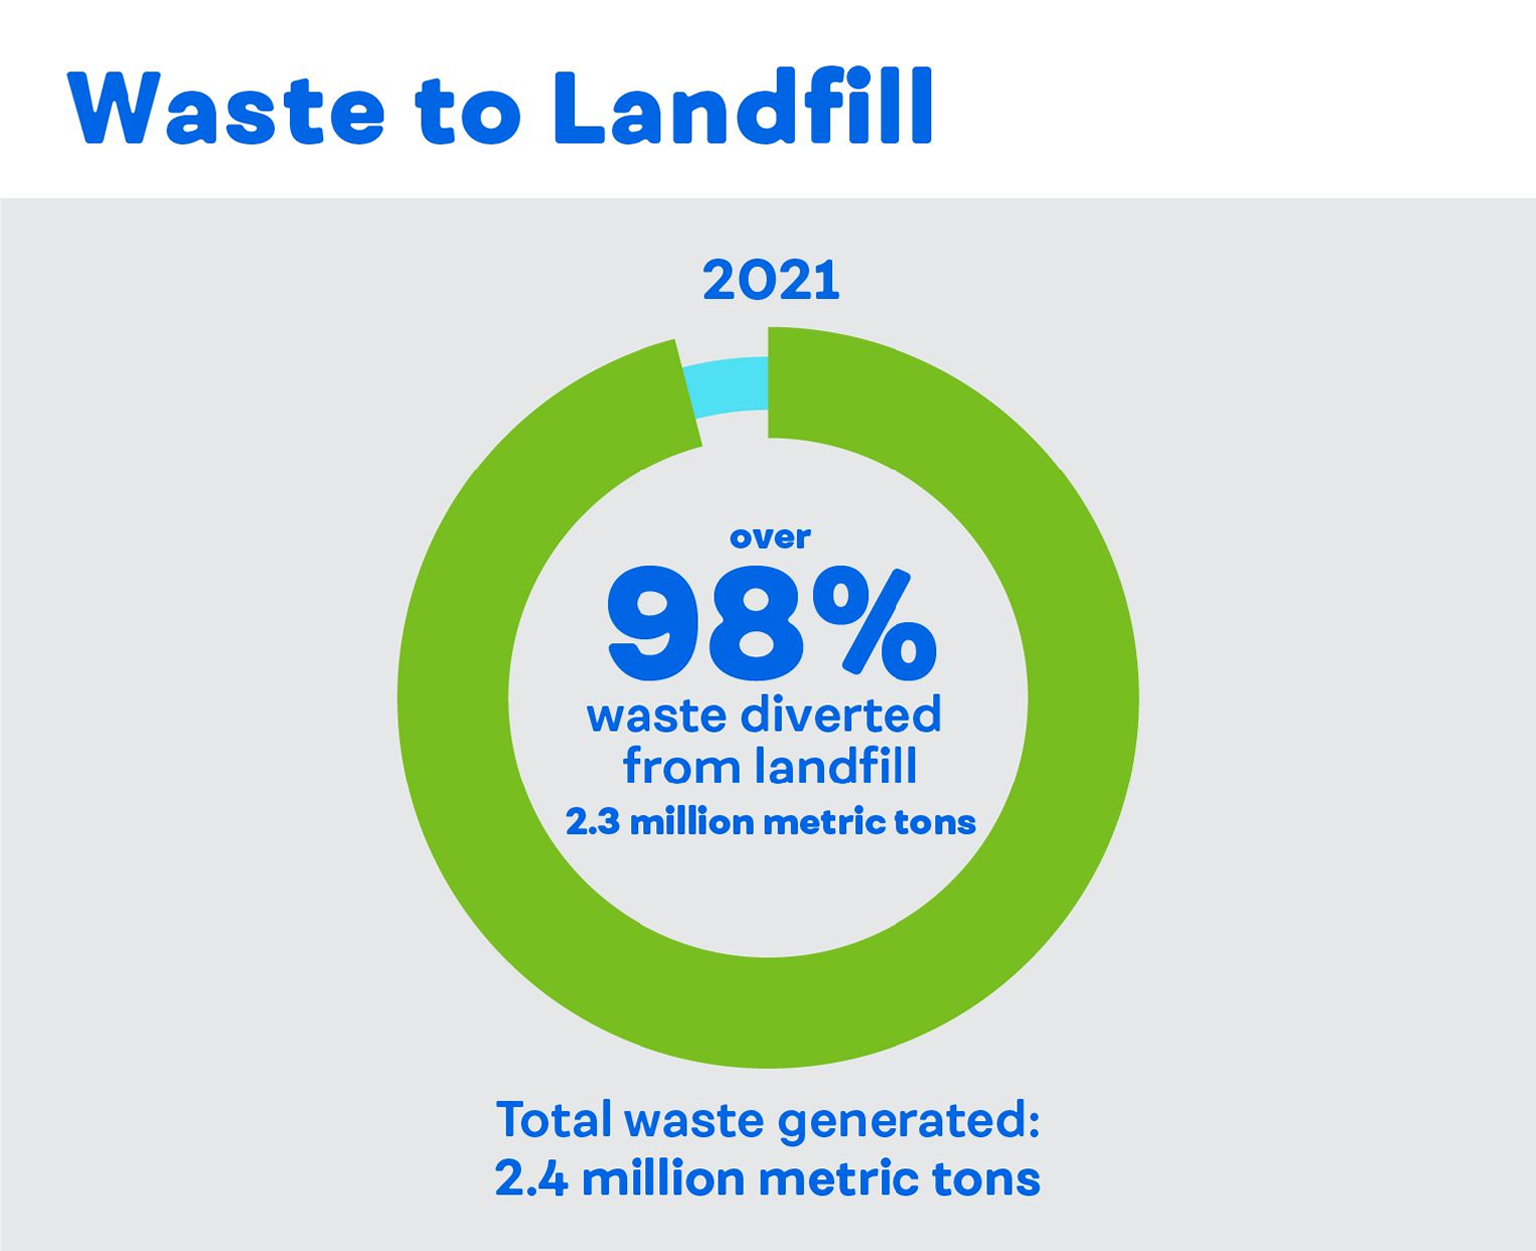 Waste to Landfill: In 2021, over 98% of waste was diverted from landfill (2.3 million metric tons). Total waste generated was 2.4 million metric tons.